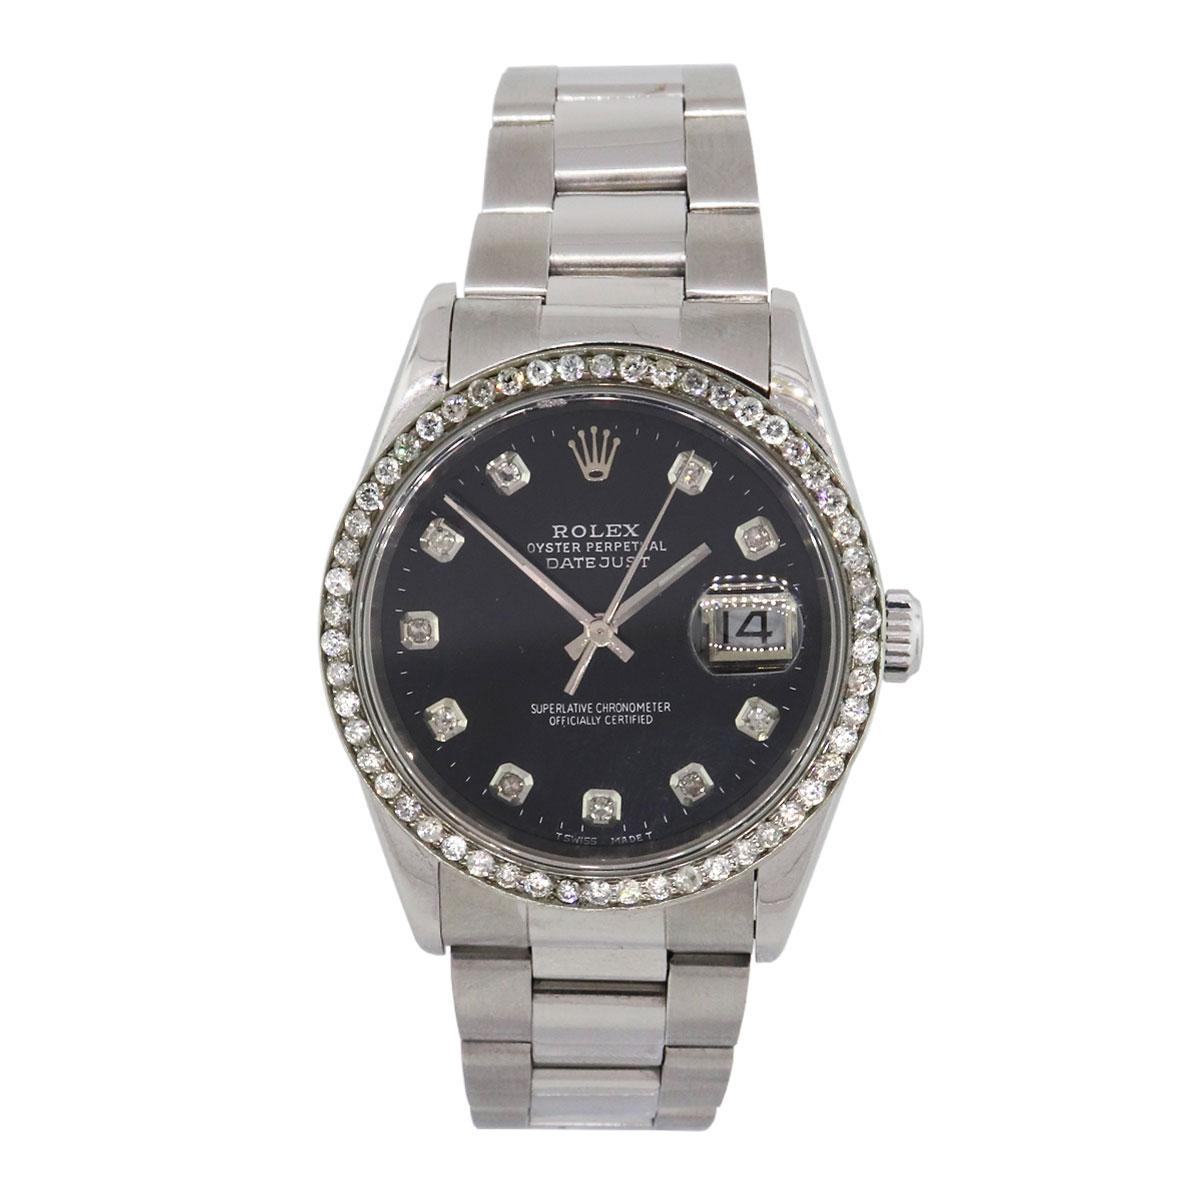 Brand: Rolex
MPN: 16200
Model: Datejust
Case Material: Stainless steel
Case Diameter: 36mm
Crystal: Sapphire crystal (scratch resistant)
Bezel: Diamond bezel (aftermarket)
Dial: Black dial with diamond hour markers (aftermarket)
Bracelet: Stainless